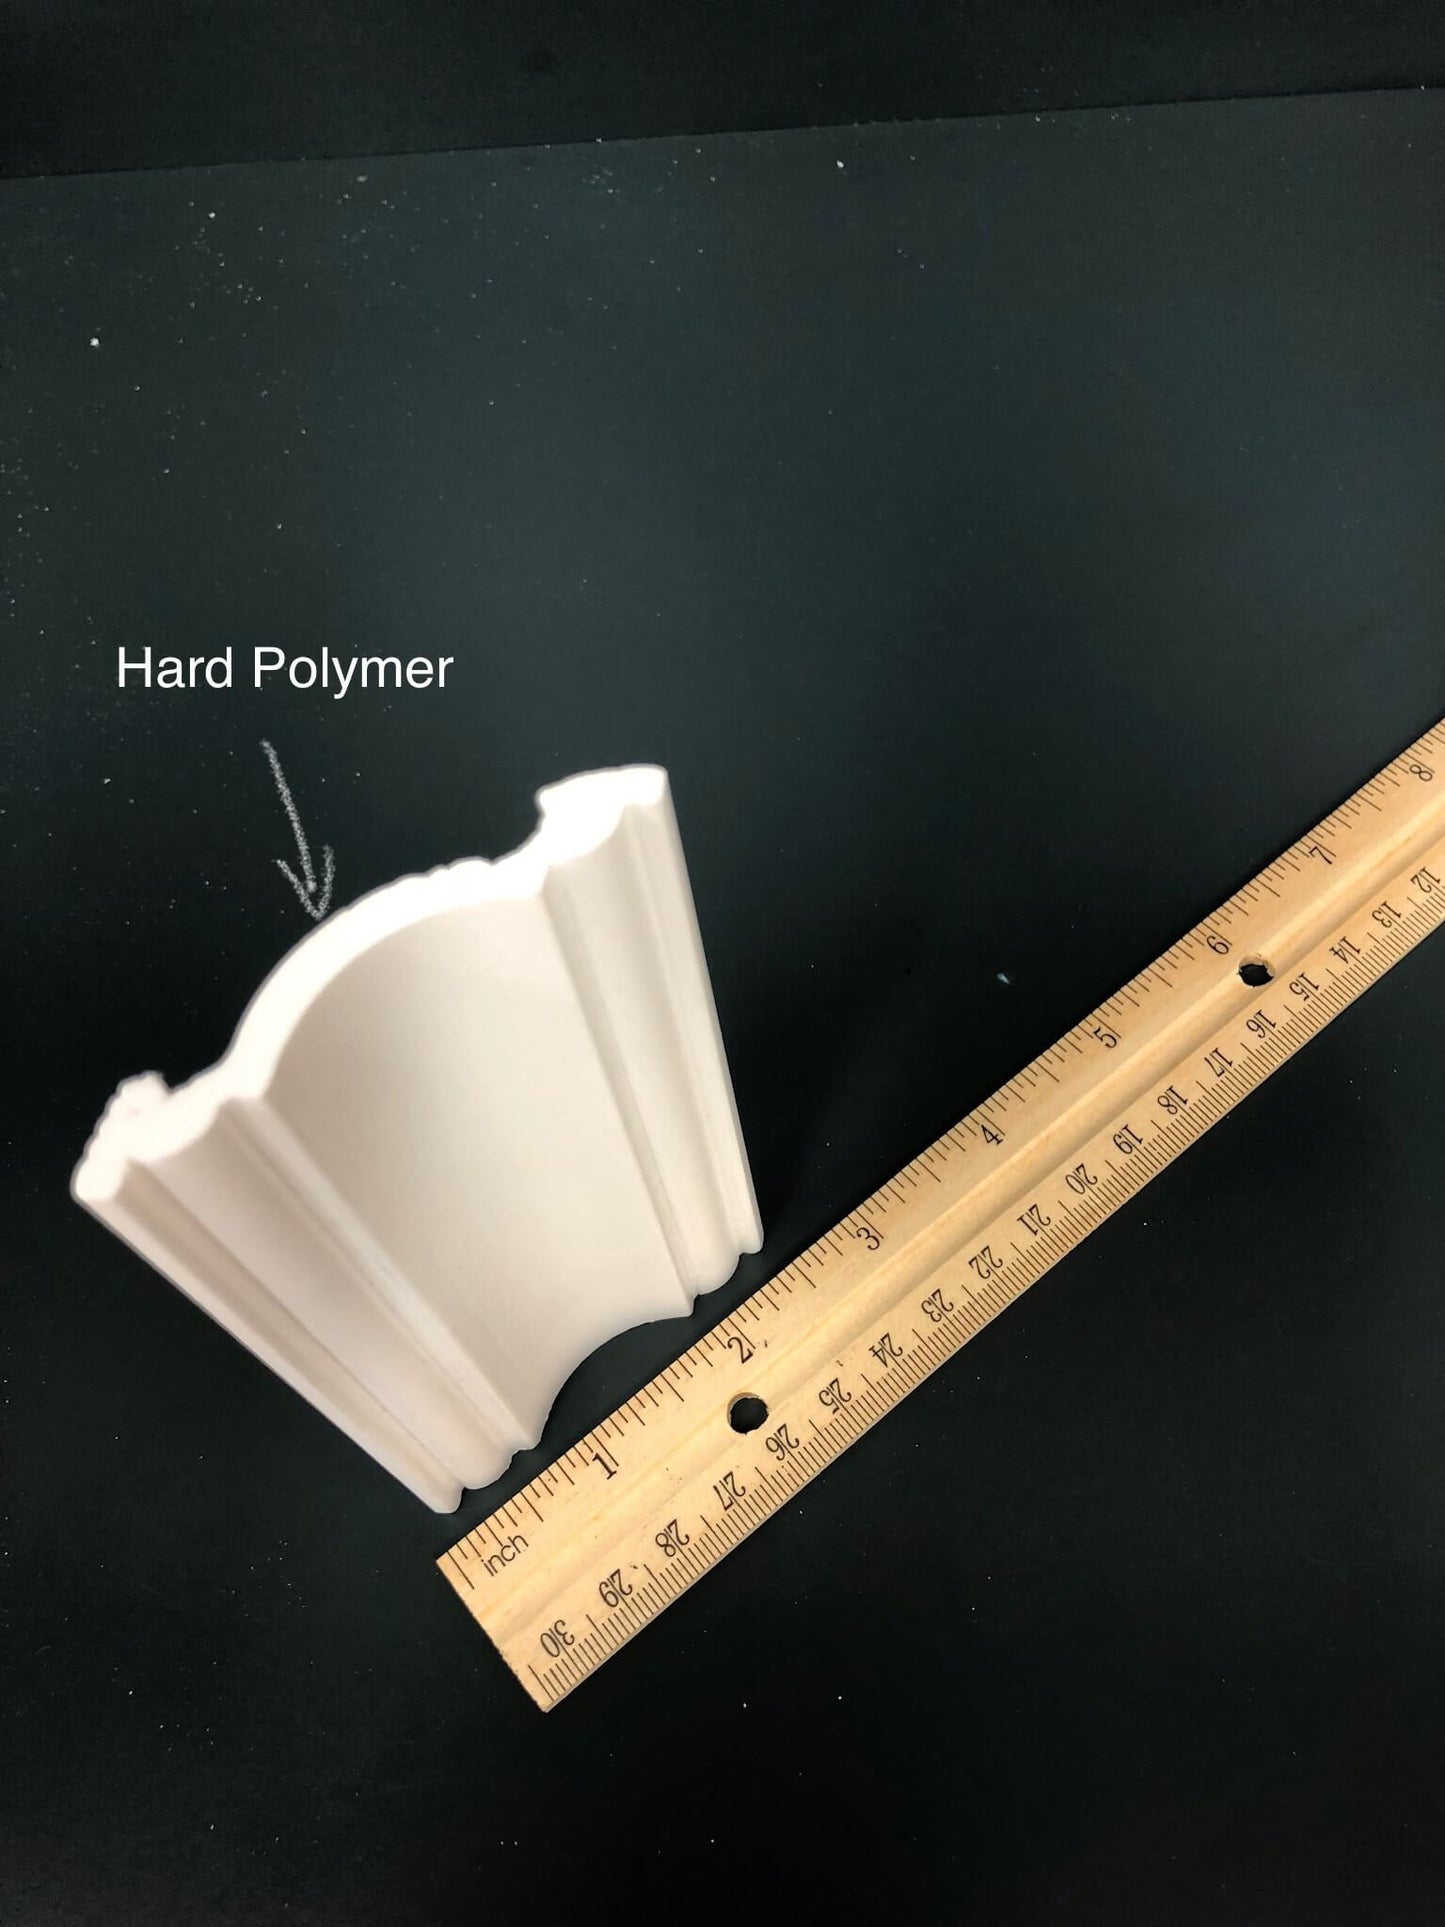 Orlando - Lightweight Coving measured by a ruler